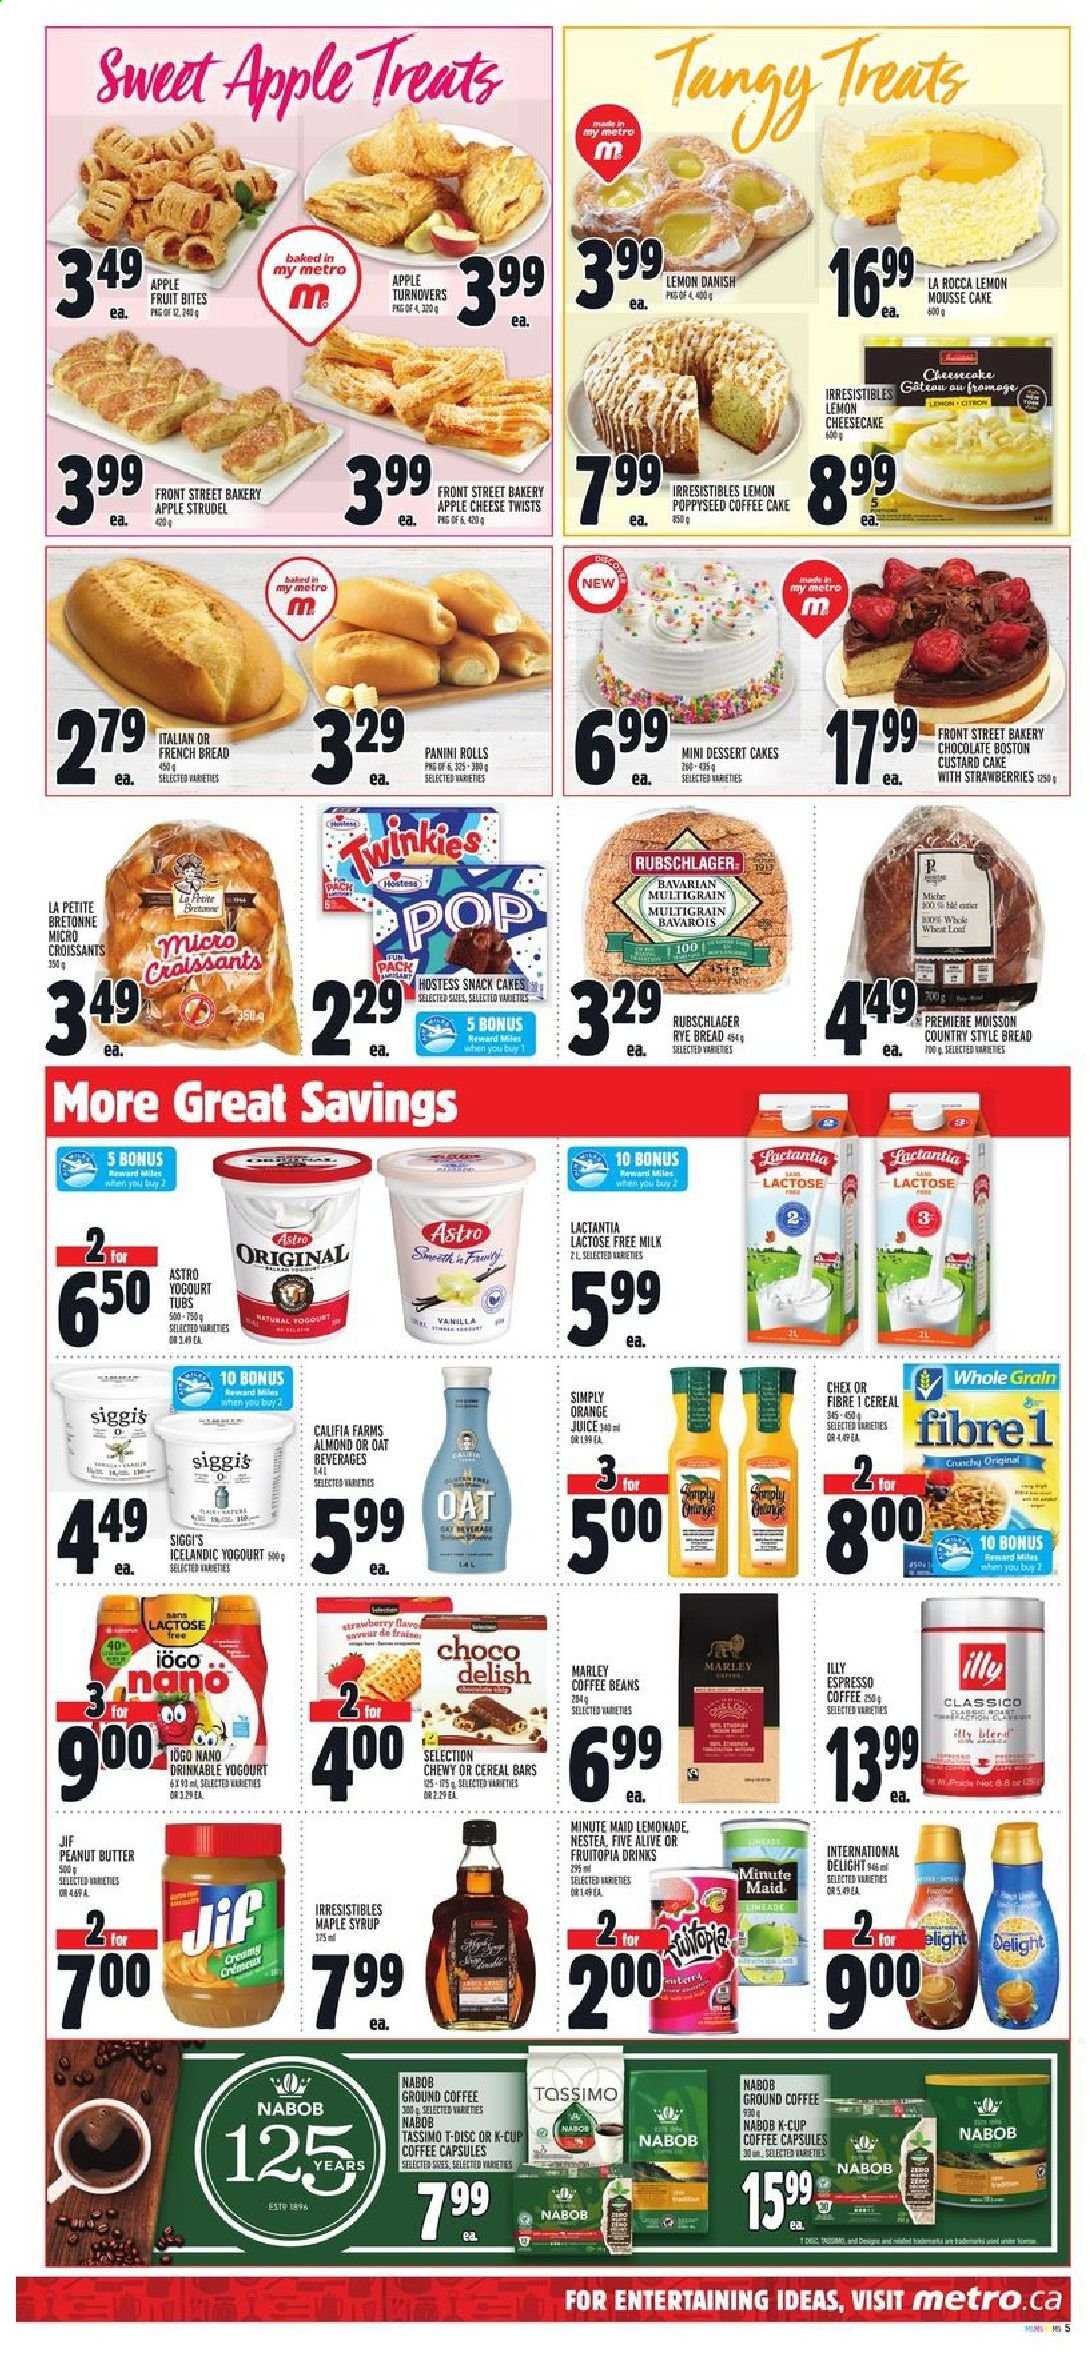 thumbnail - Metro Flyer - January 14, 2021 - January 20, 2021 - Sales products - bread, cake, panini, strudel, turnovers, french bread, rye bread, cheesecake, coffee cake, custard cake, dessert, strawberries, mousse, milk, lactose free milk, oat milk, plant-based milk, cereal bar, snack cake, bars, maple syrup, peanut butter, syrup, Jif, lemonade, orange juice, juice, fruit drink, ice tea, coffee beans, ground coffee, coffee capsules, K-Cups, Illy, PREMIERE. Page 6.